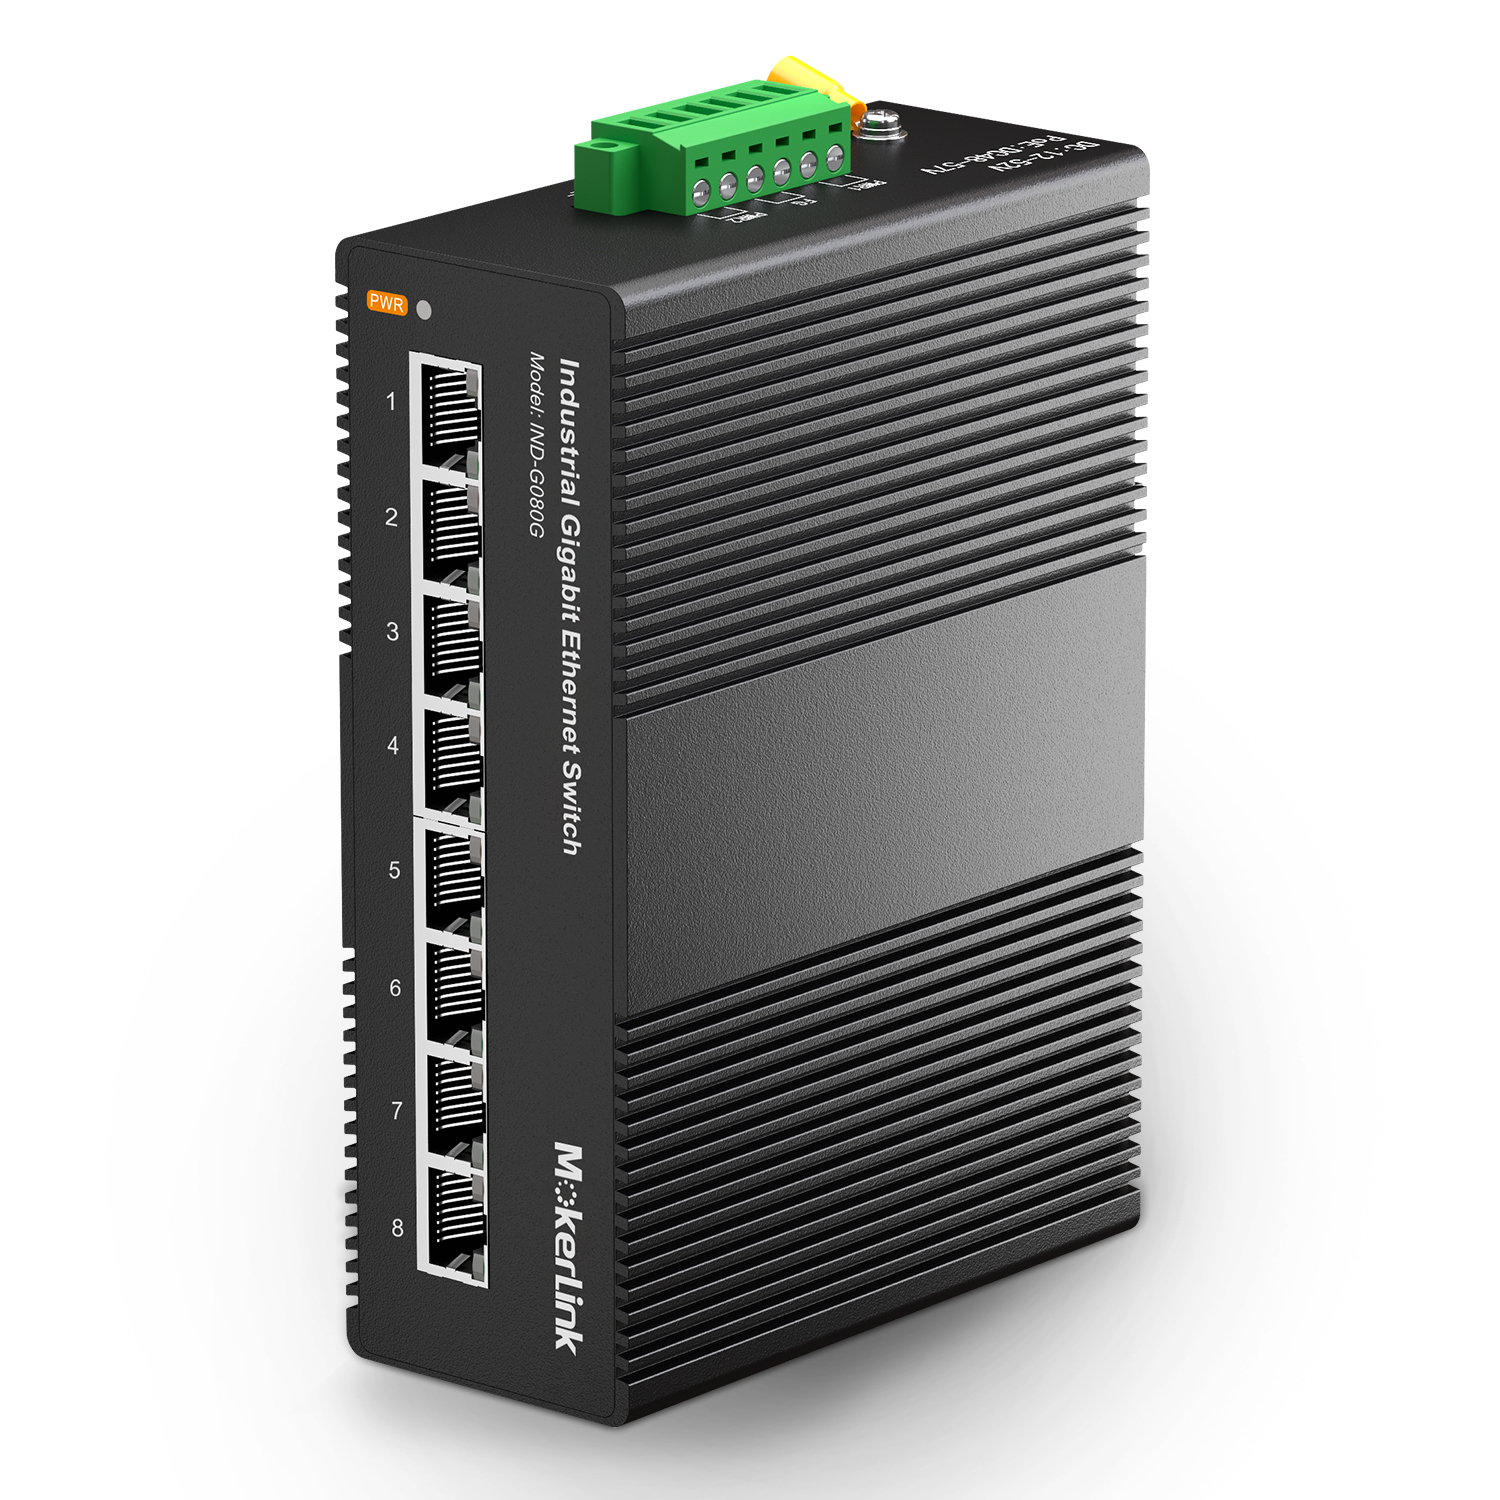 5 Port Unmanaged Industrial Gigabit Ethernet Switch - DIN Rail /  Wall-Mountable